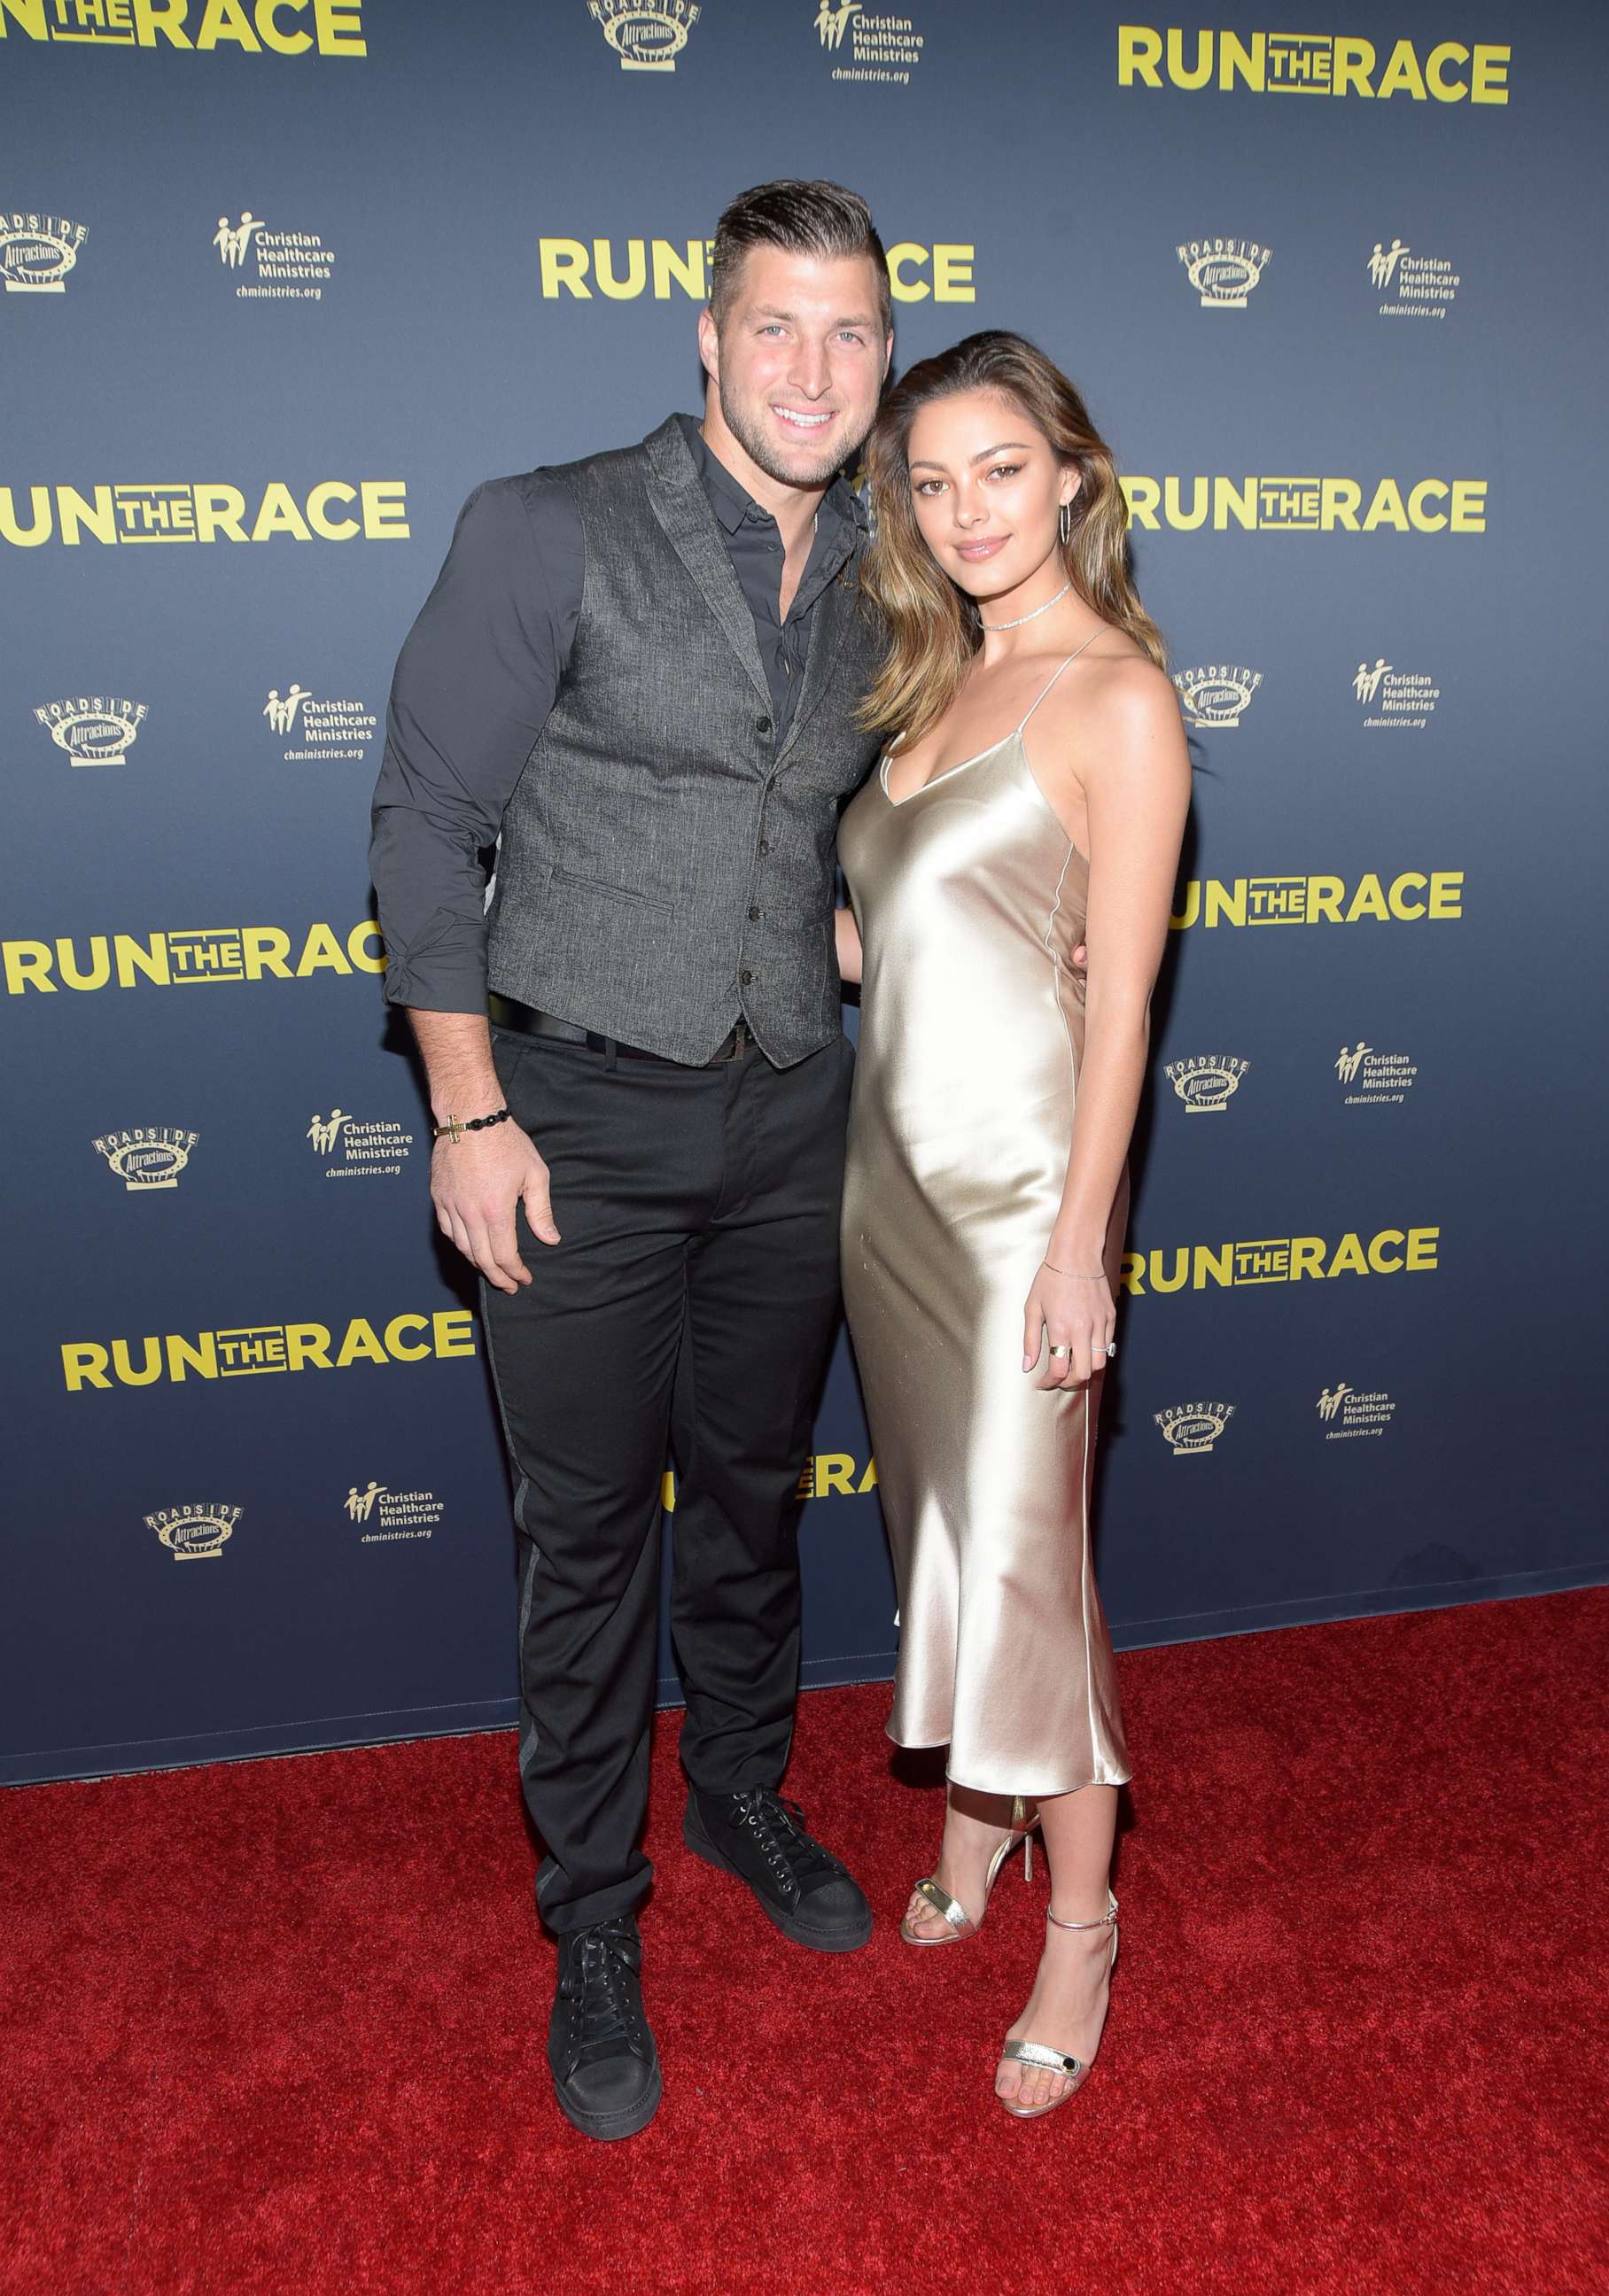 PHOTO: Tim Tebow and Demi-Leigh Nel-Peters at the Egyptian Theatre, Feb 11, 2019, in Hollywood, Calif.